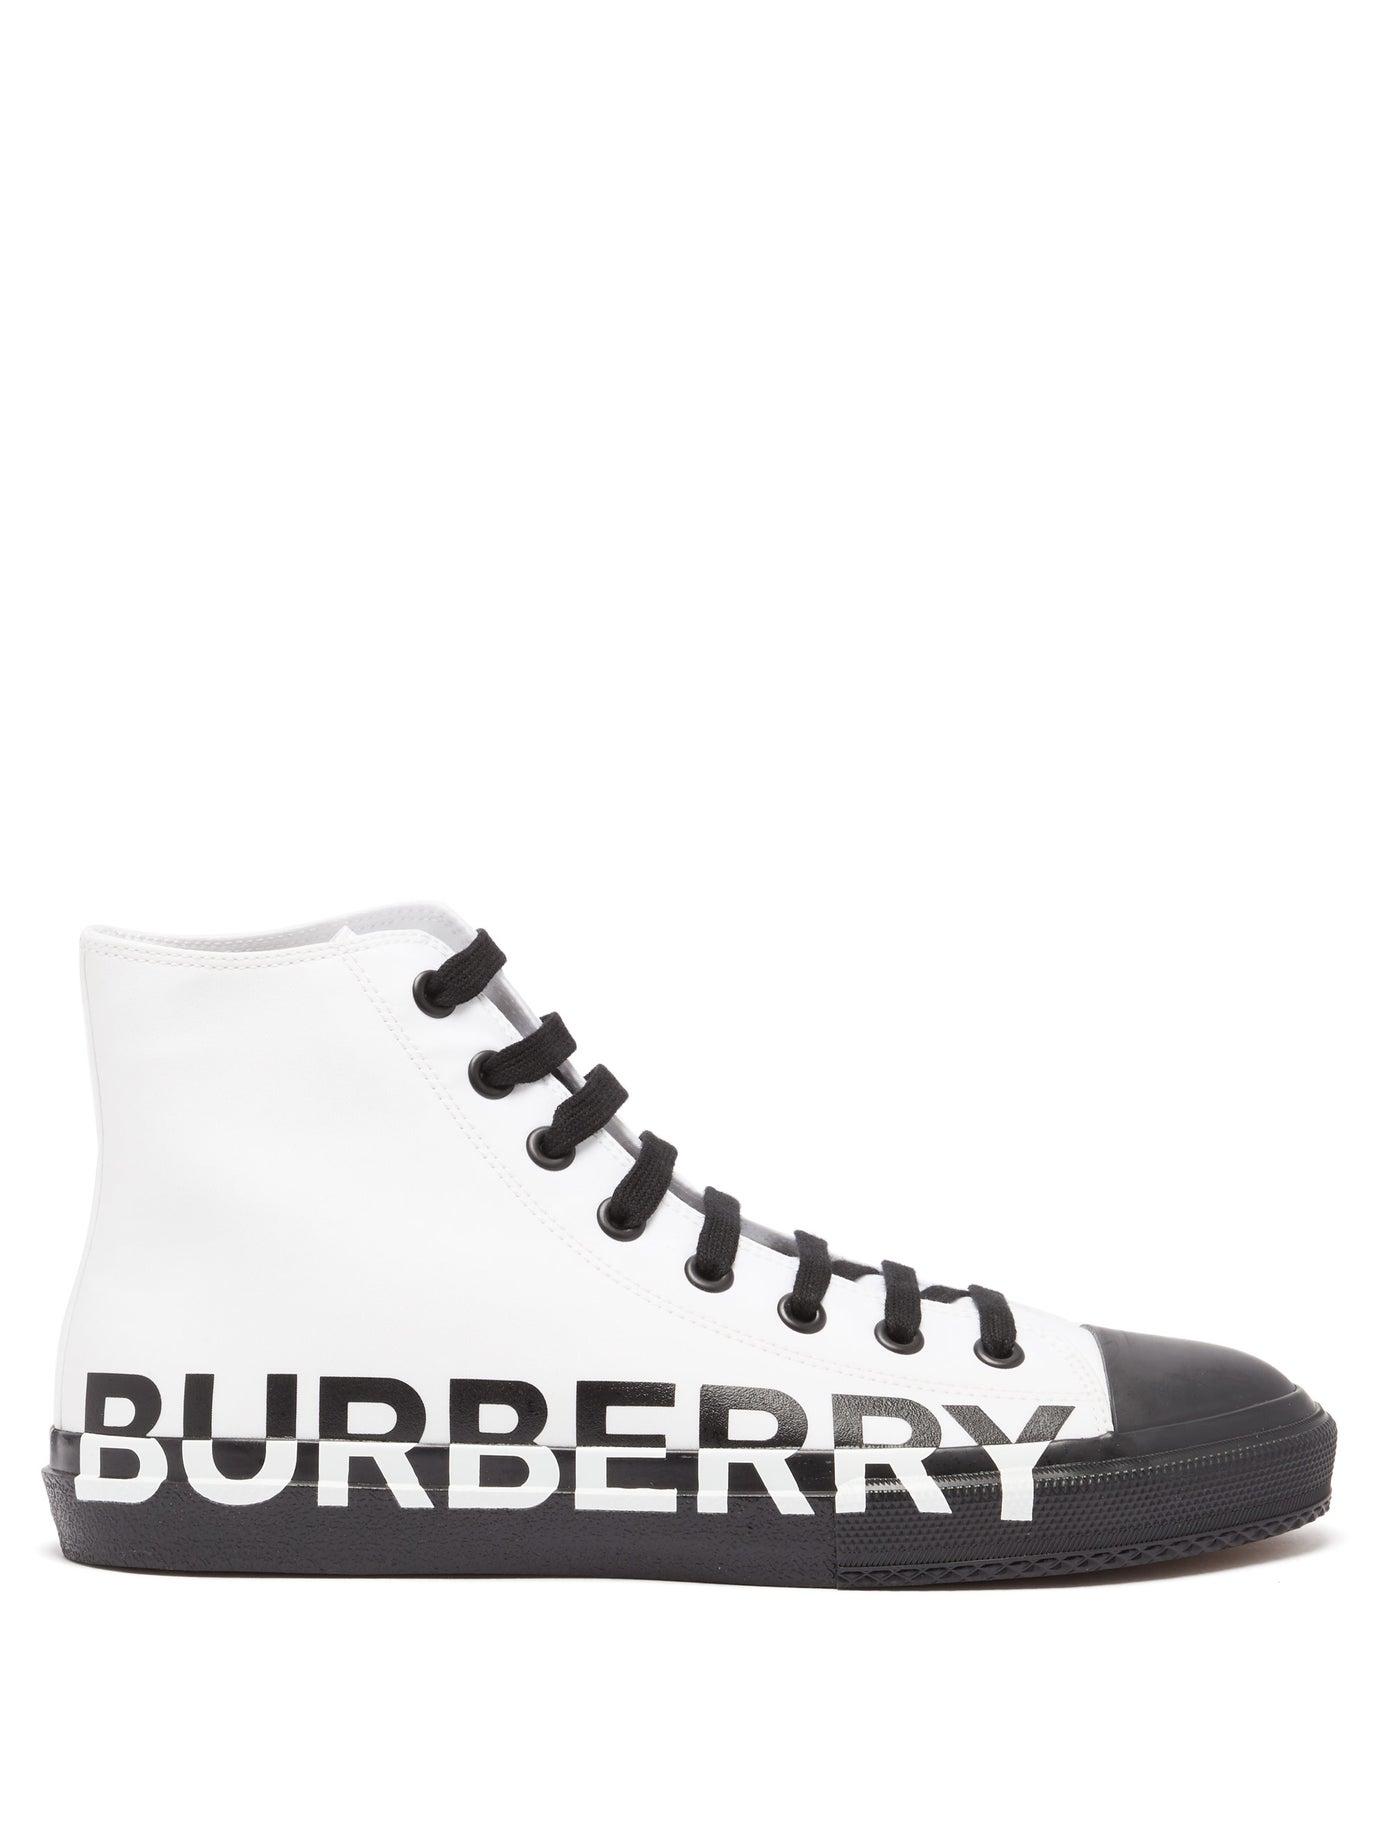 Burberry Larkhall Cotton Canvas High Top Sneakers for Men | Lyst